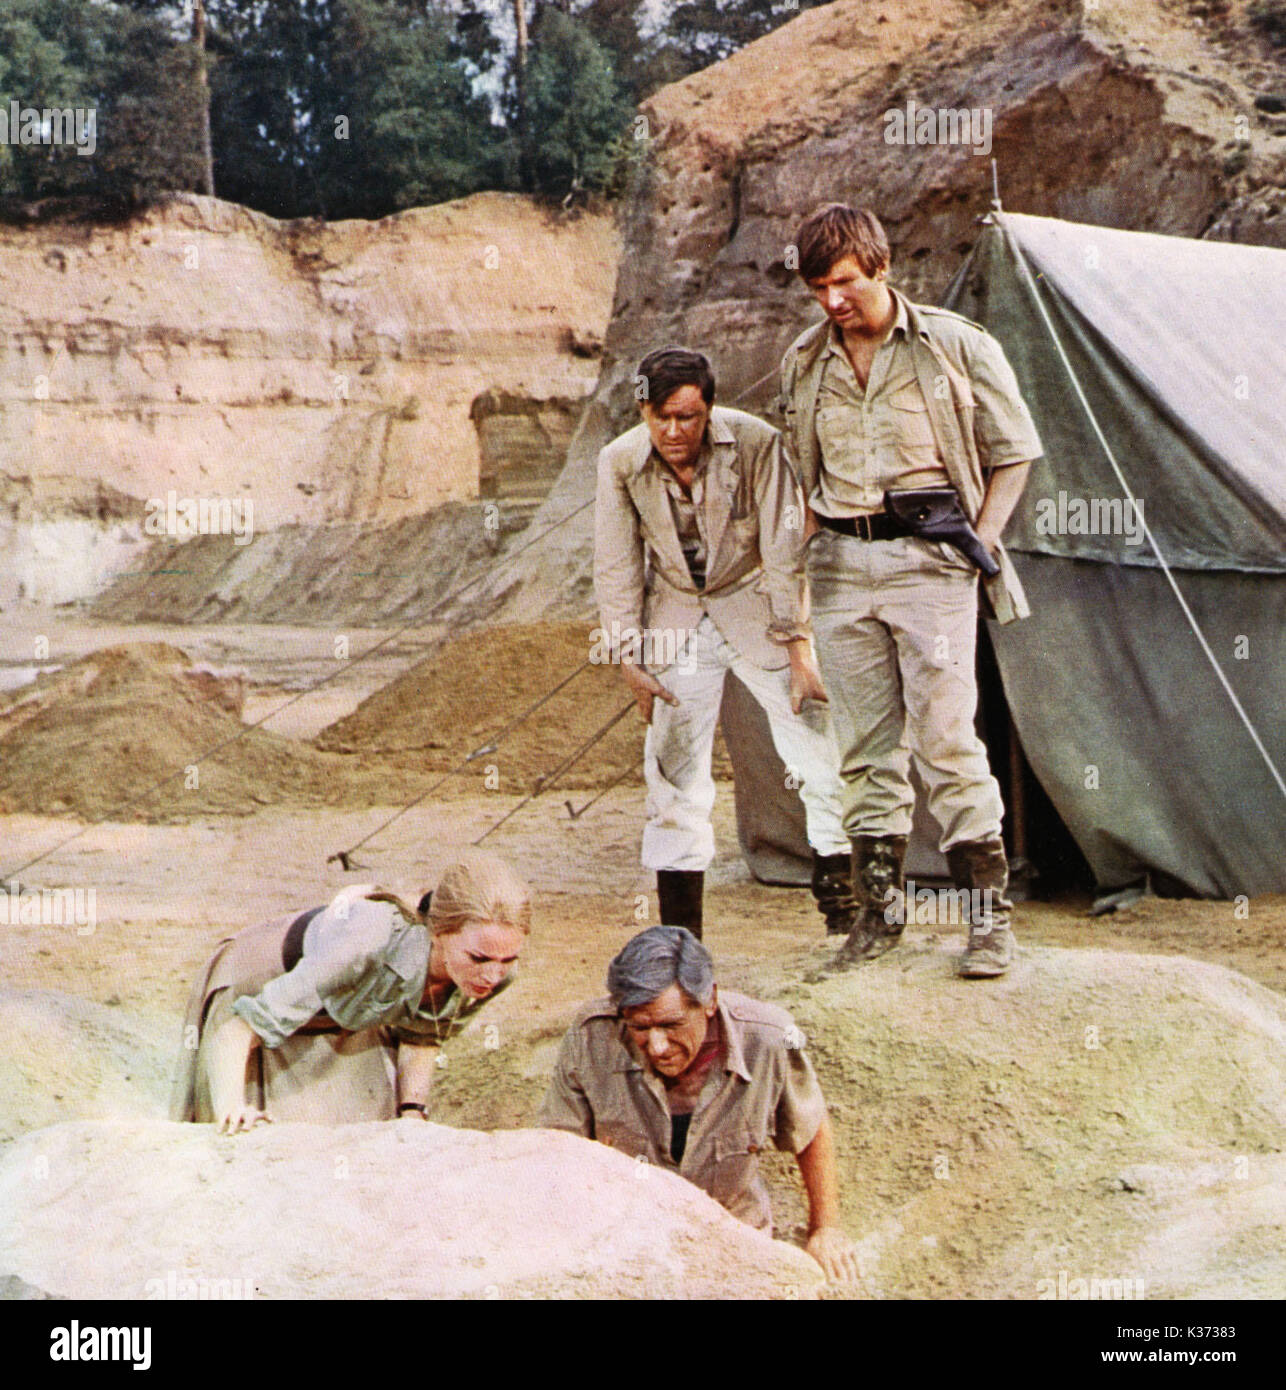 THE MUMMY'S SHROUD [Br 1967] ELIZABETH SELLARS AND ANDRE MORELL (IN THE TRENCH), JOHN PHILLIPS AND DAVID BUCK (BEHIND)     Date: 1967 Stock Photo